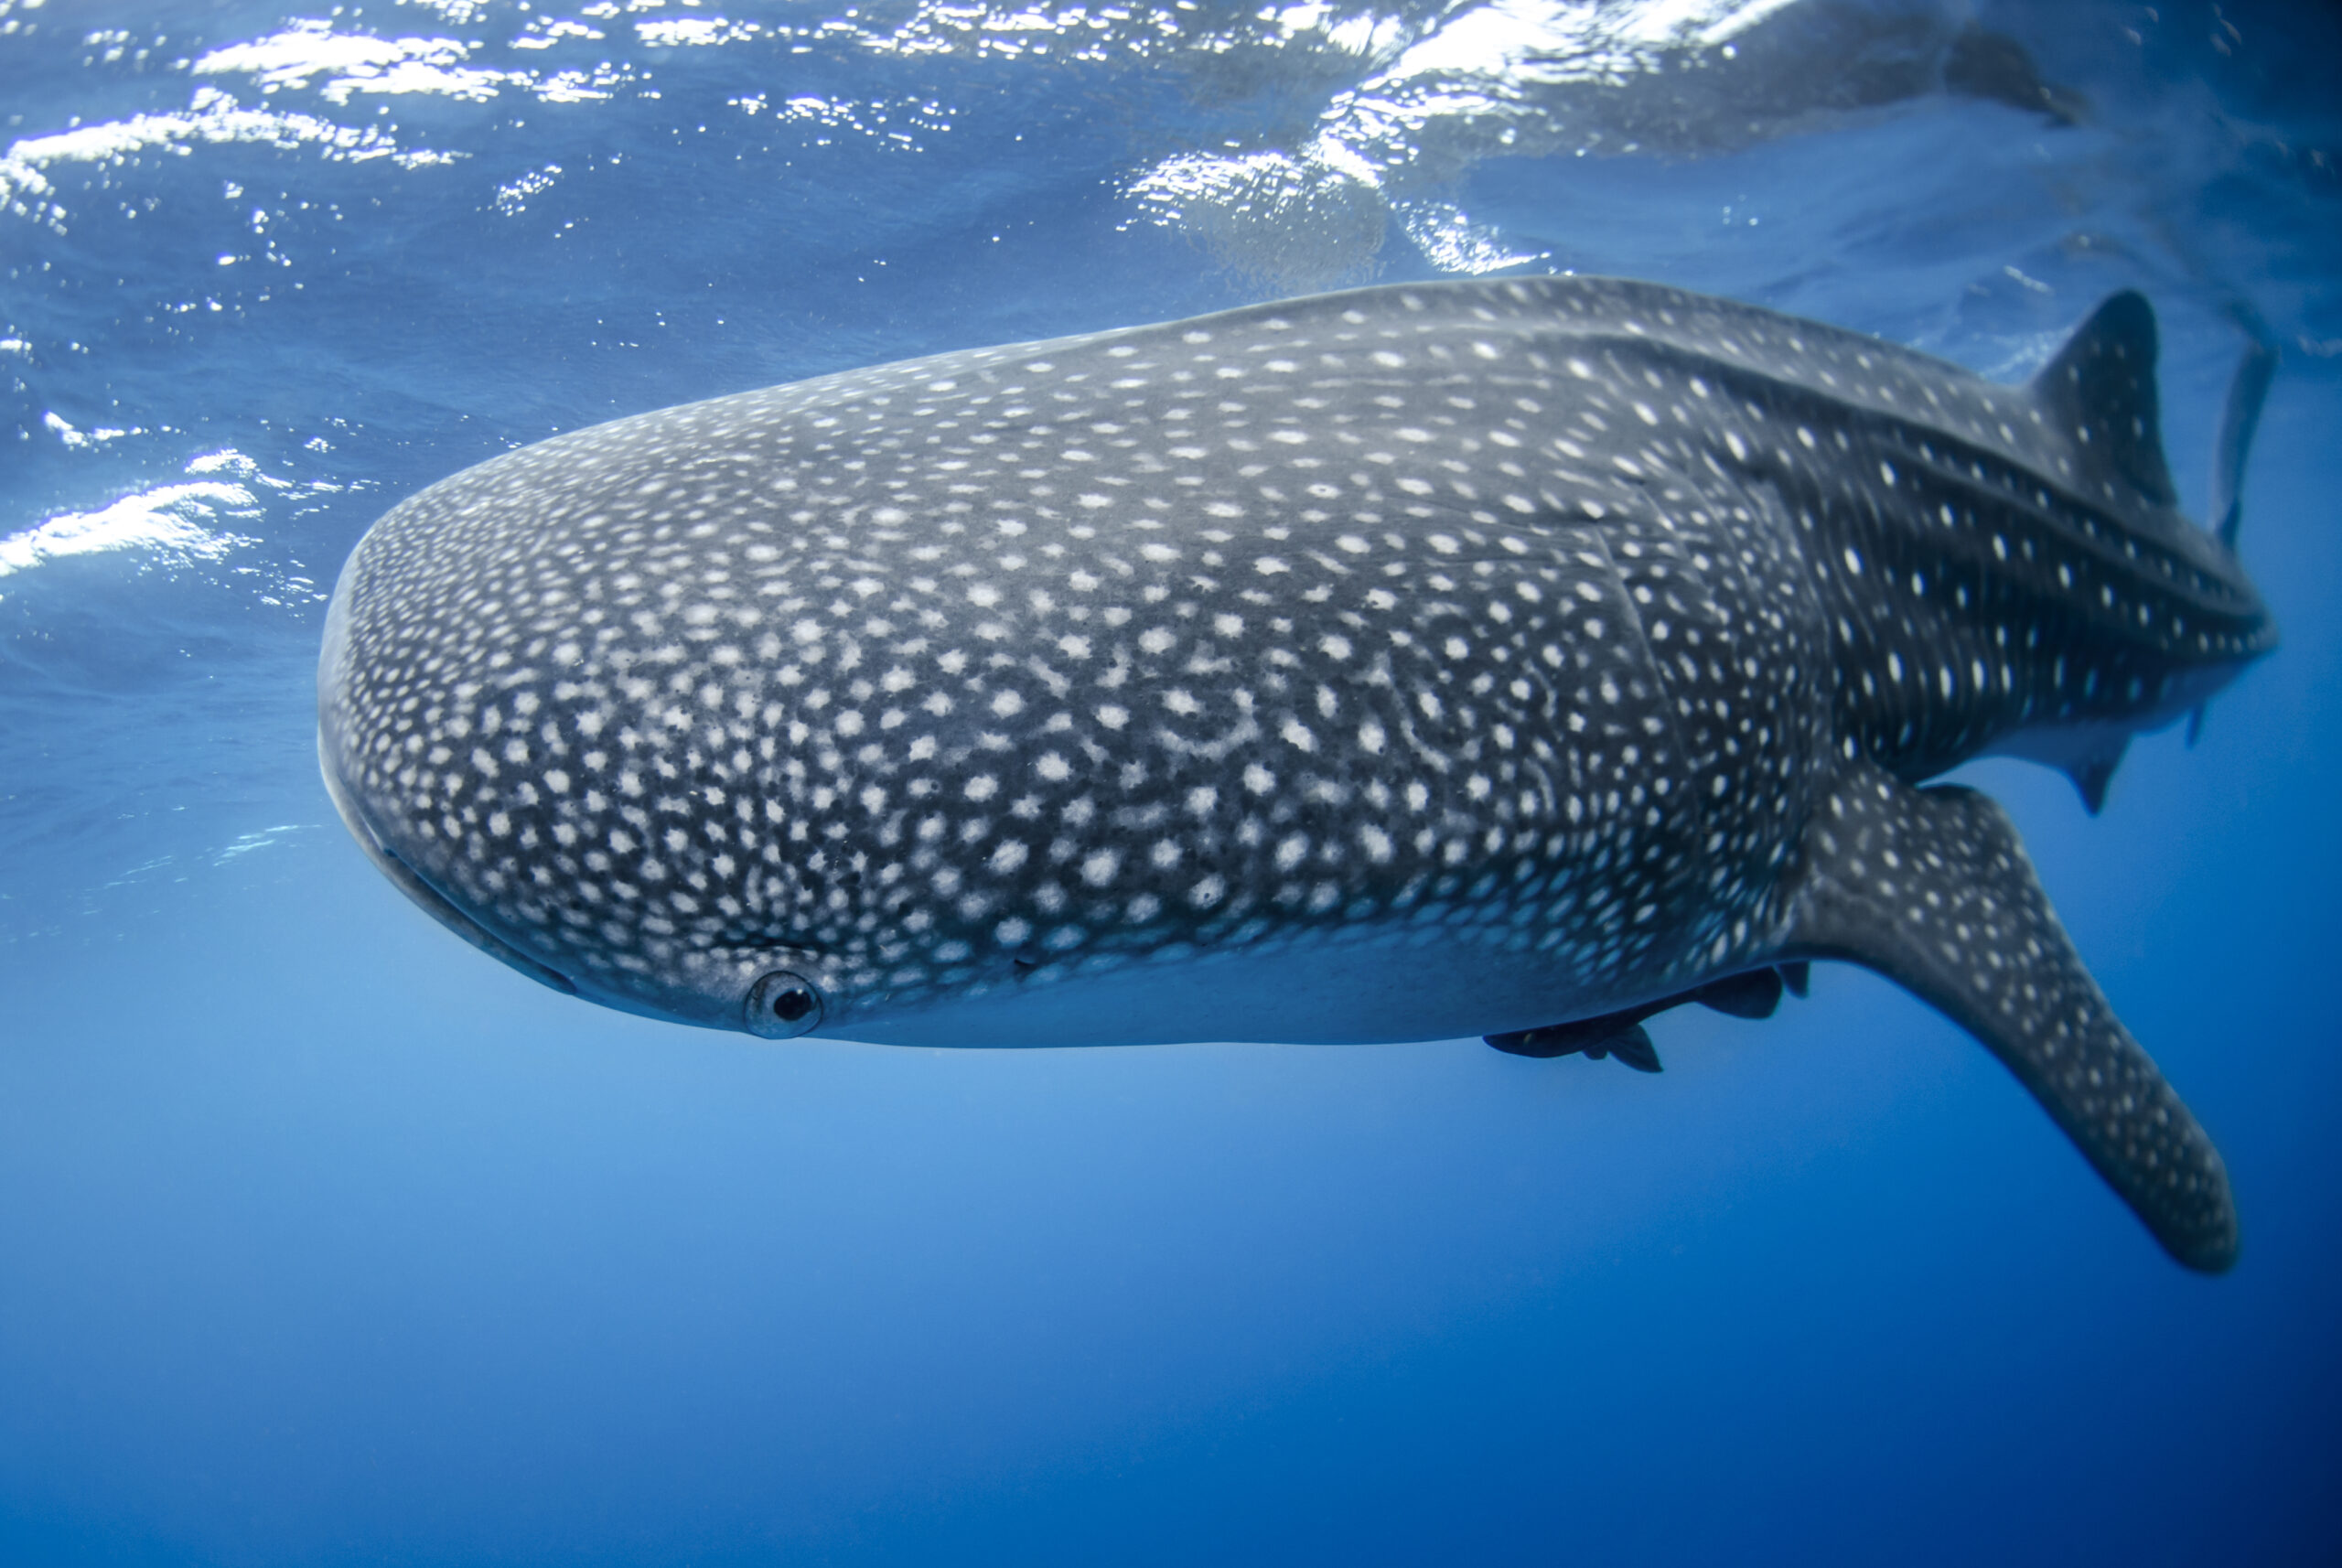 The largest fish in the ocean, the whale shark, courtesy of NOAA